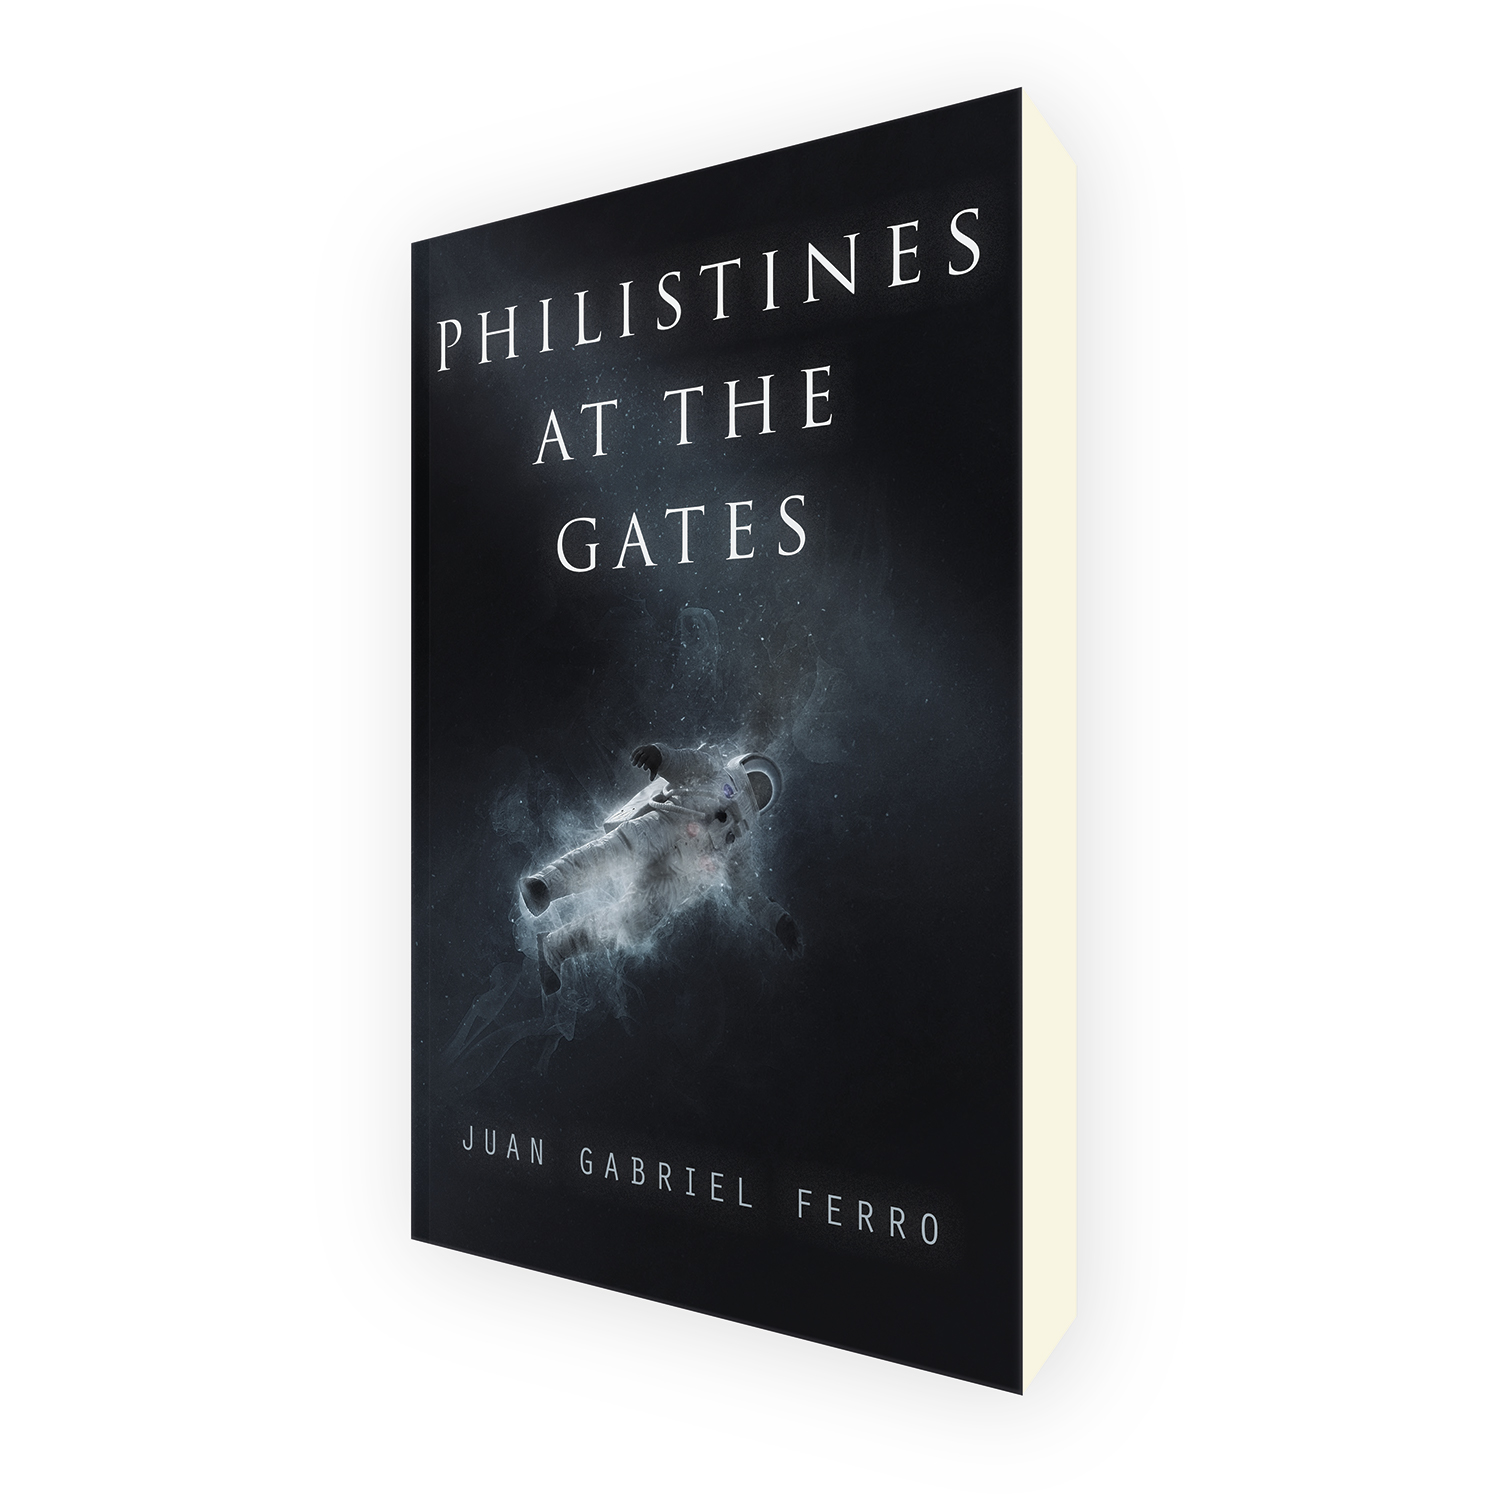 'Philistines At The Gates' is a bespoke cover design for a modern scifi thriller novel. The book cover was designed by Mark Thomas, of coverness.com. To find out more about my book design services, please visit www.coverness.com.